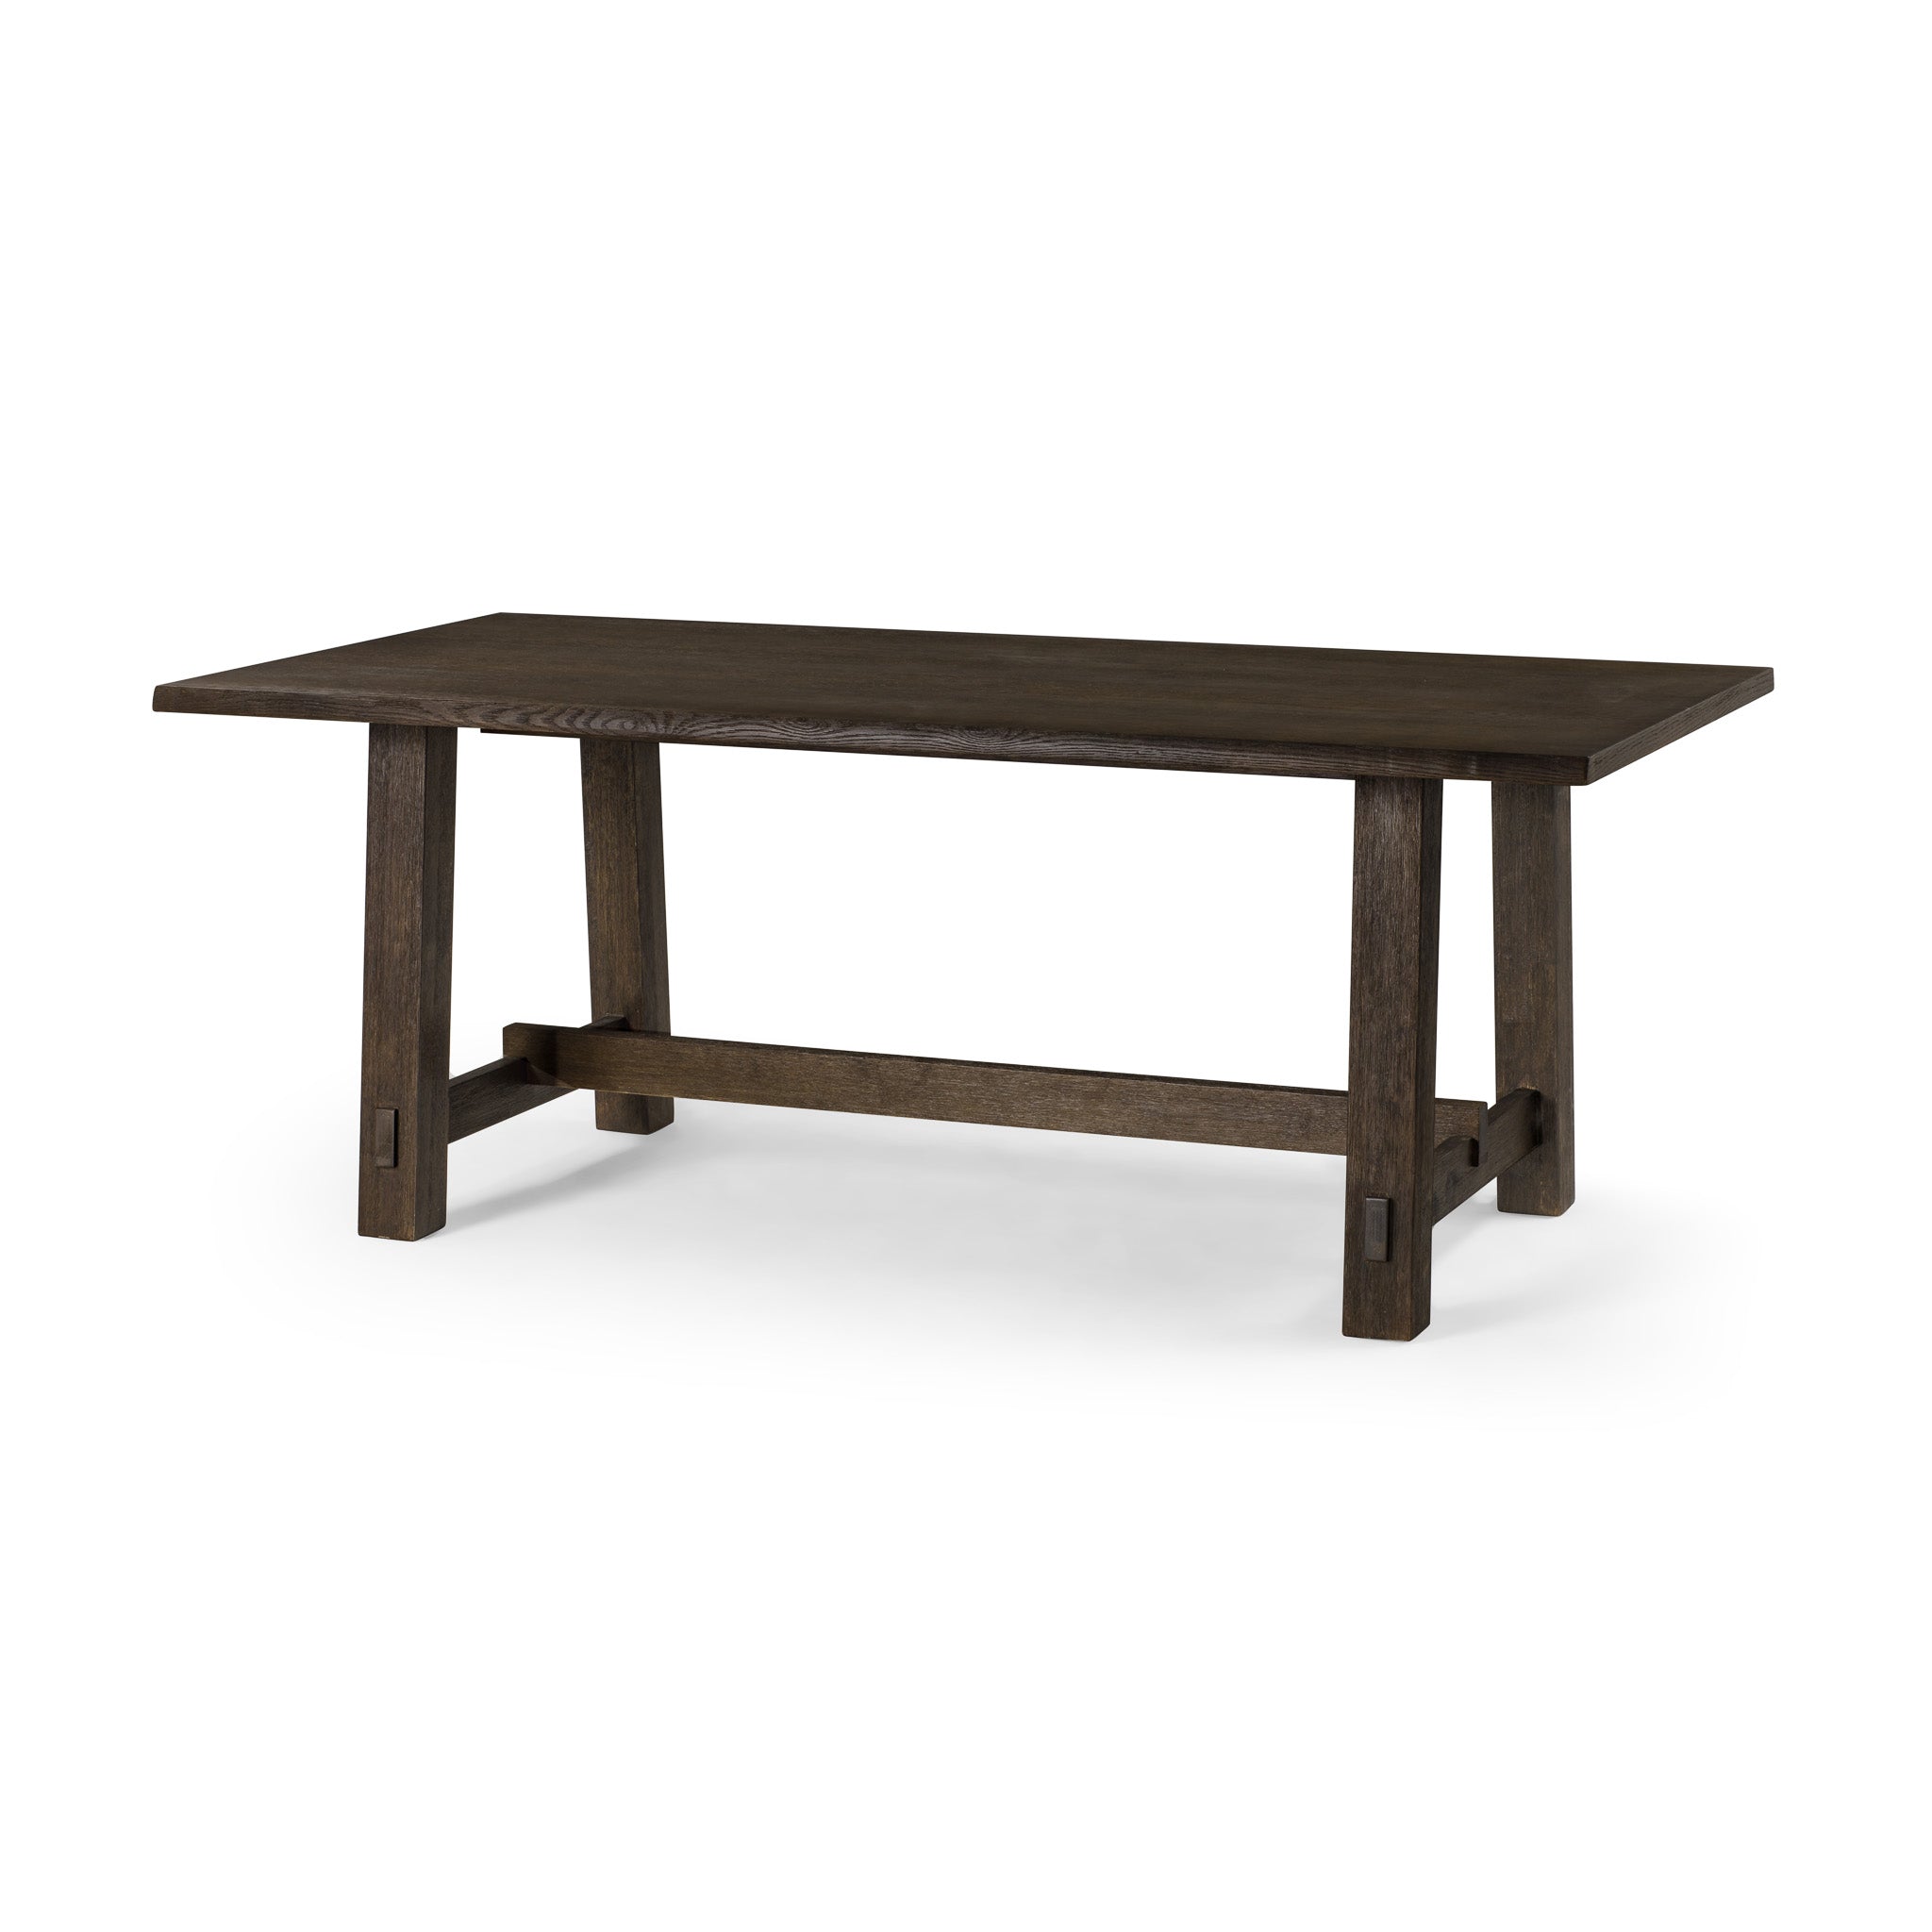 Yves Organic Rectangular Wooden Dining Table in Weathered Brown Finish in Dining Furniture by Maven Lane